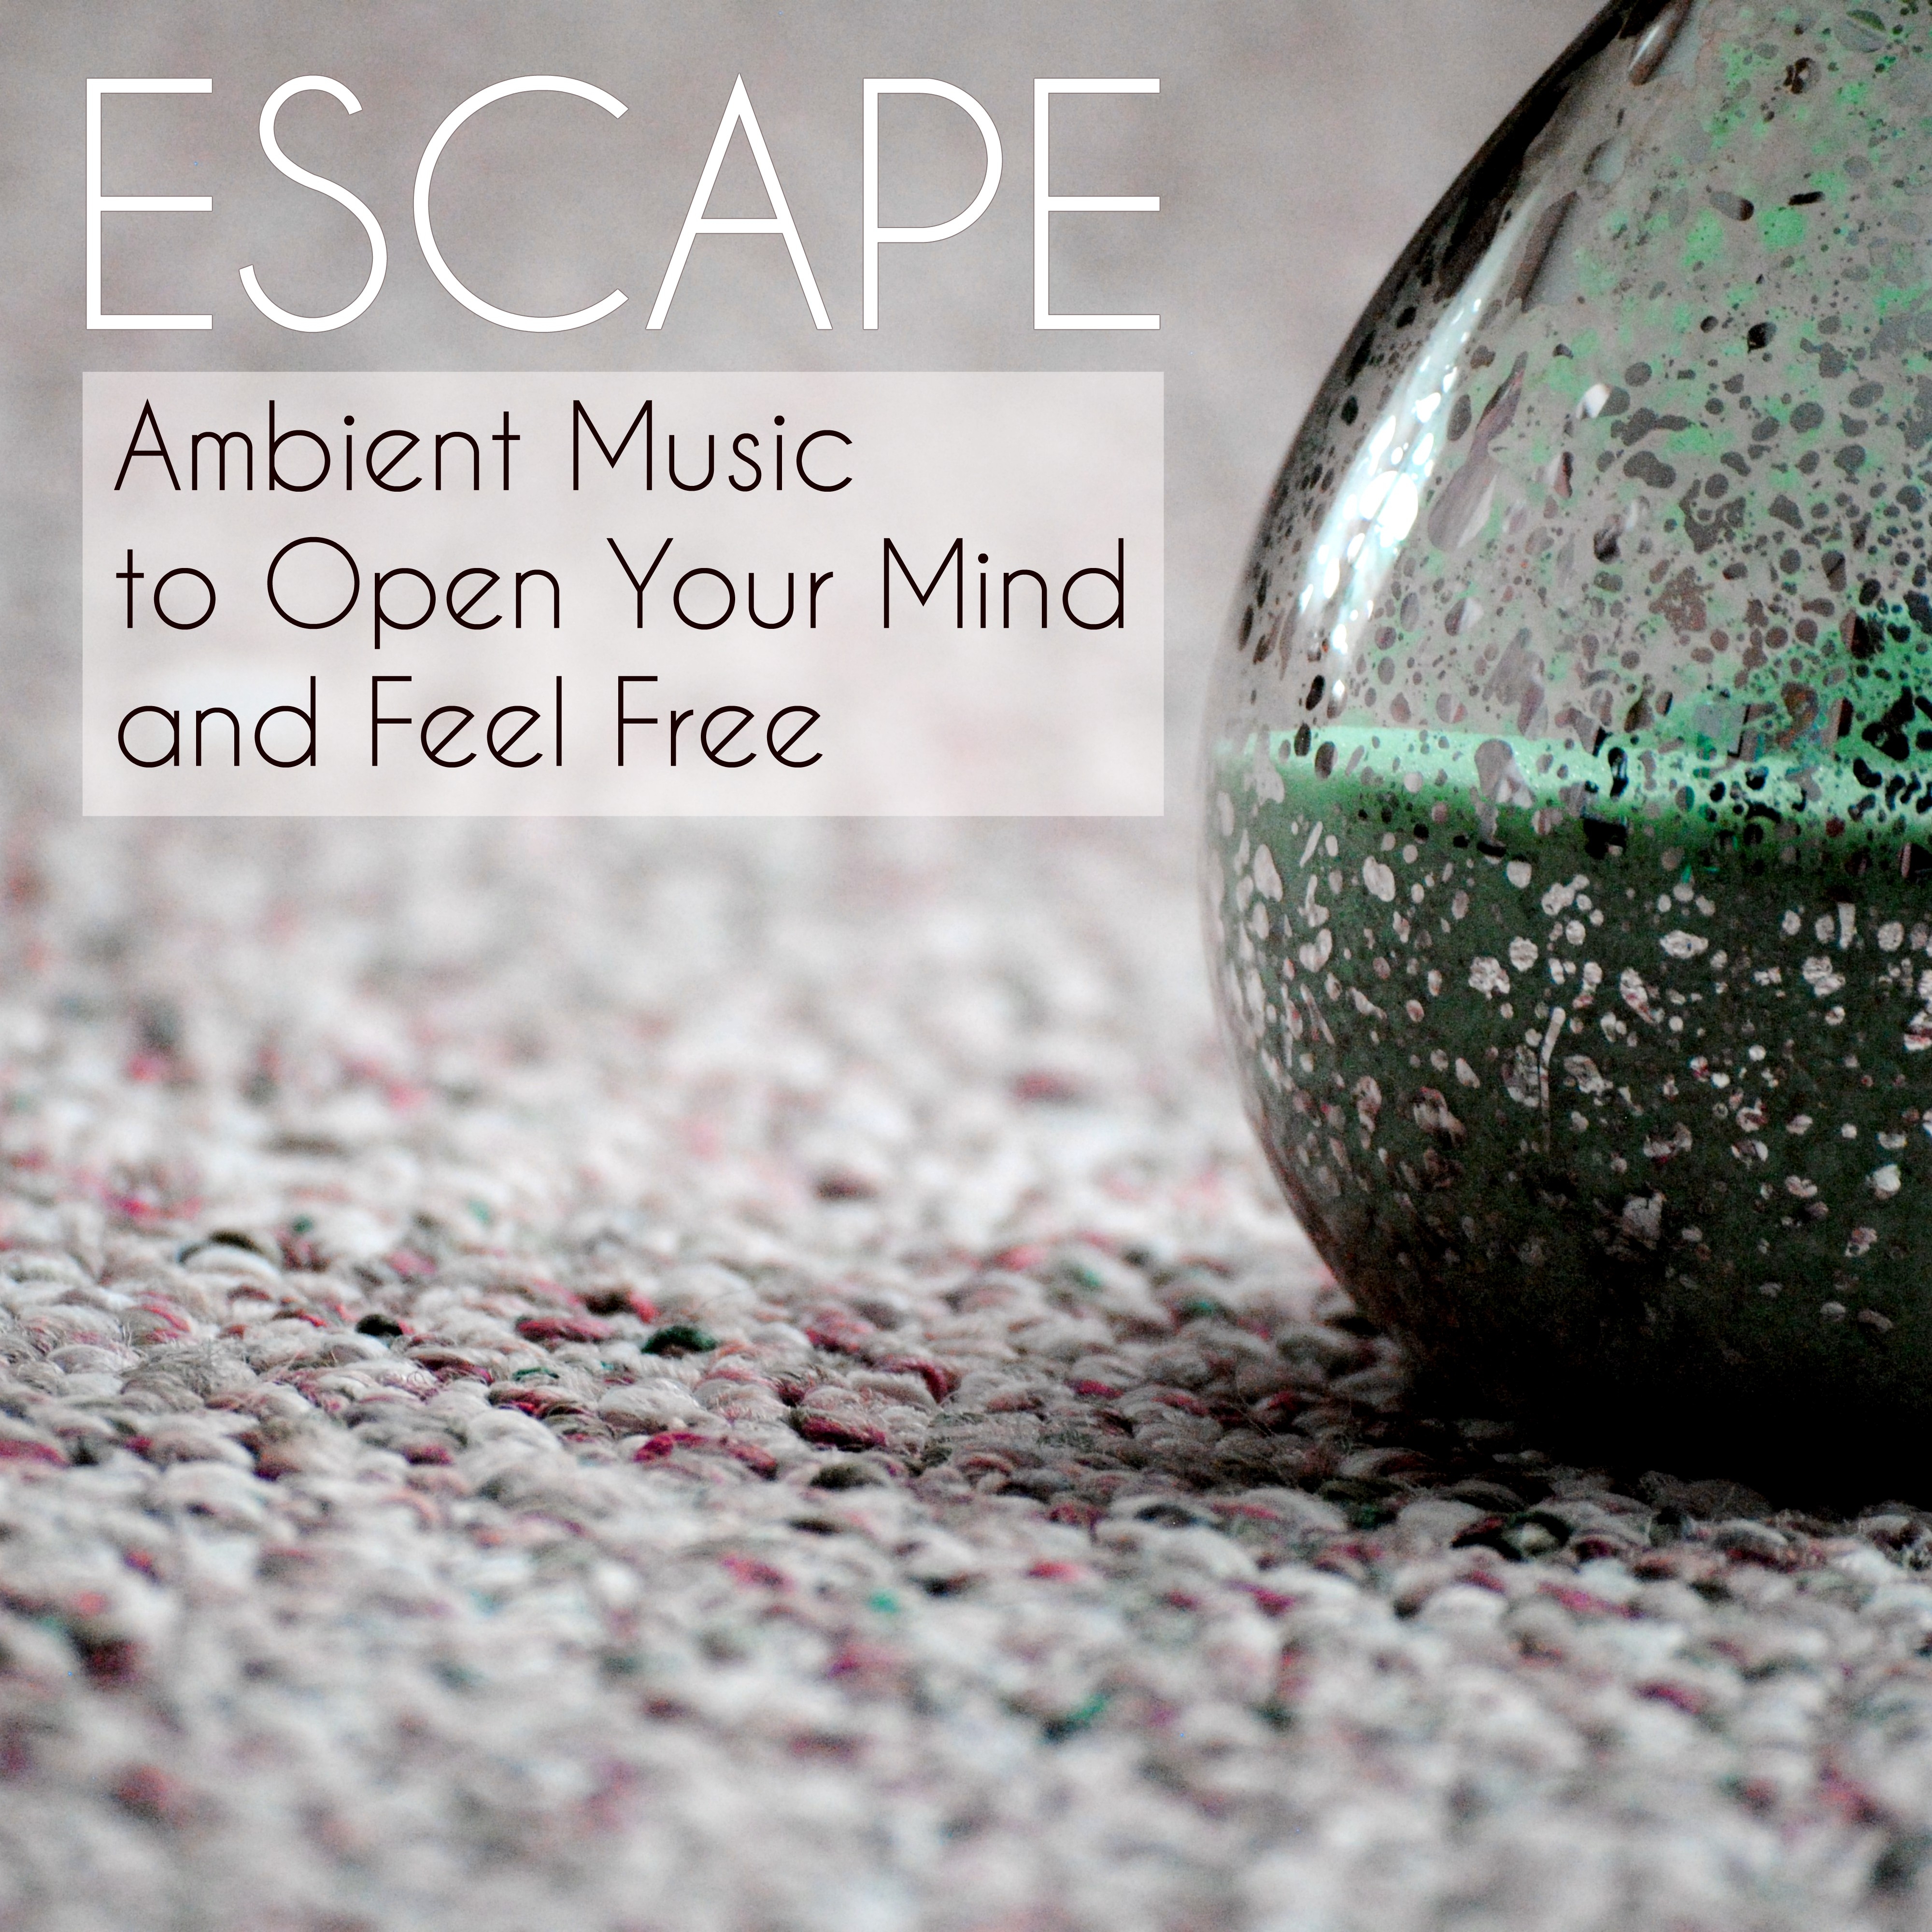 Escape  Ambient Music to Open Your Mind and Feel Free